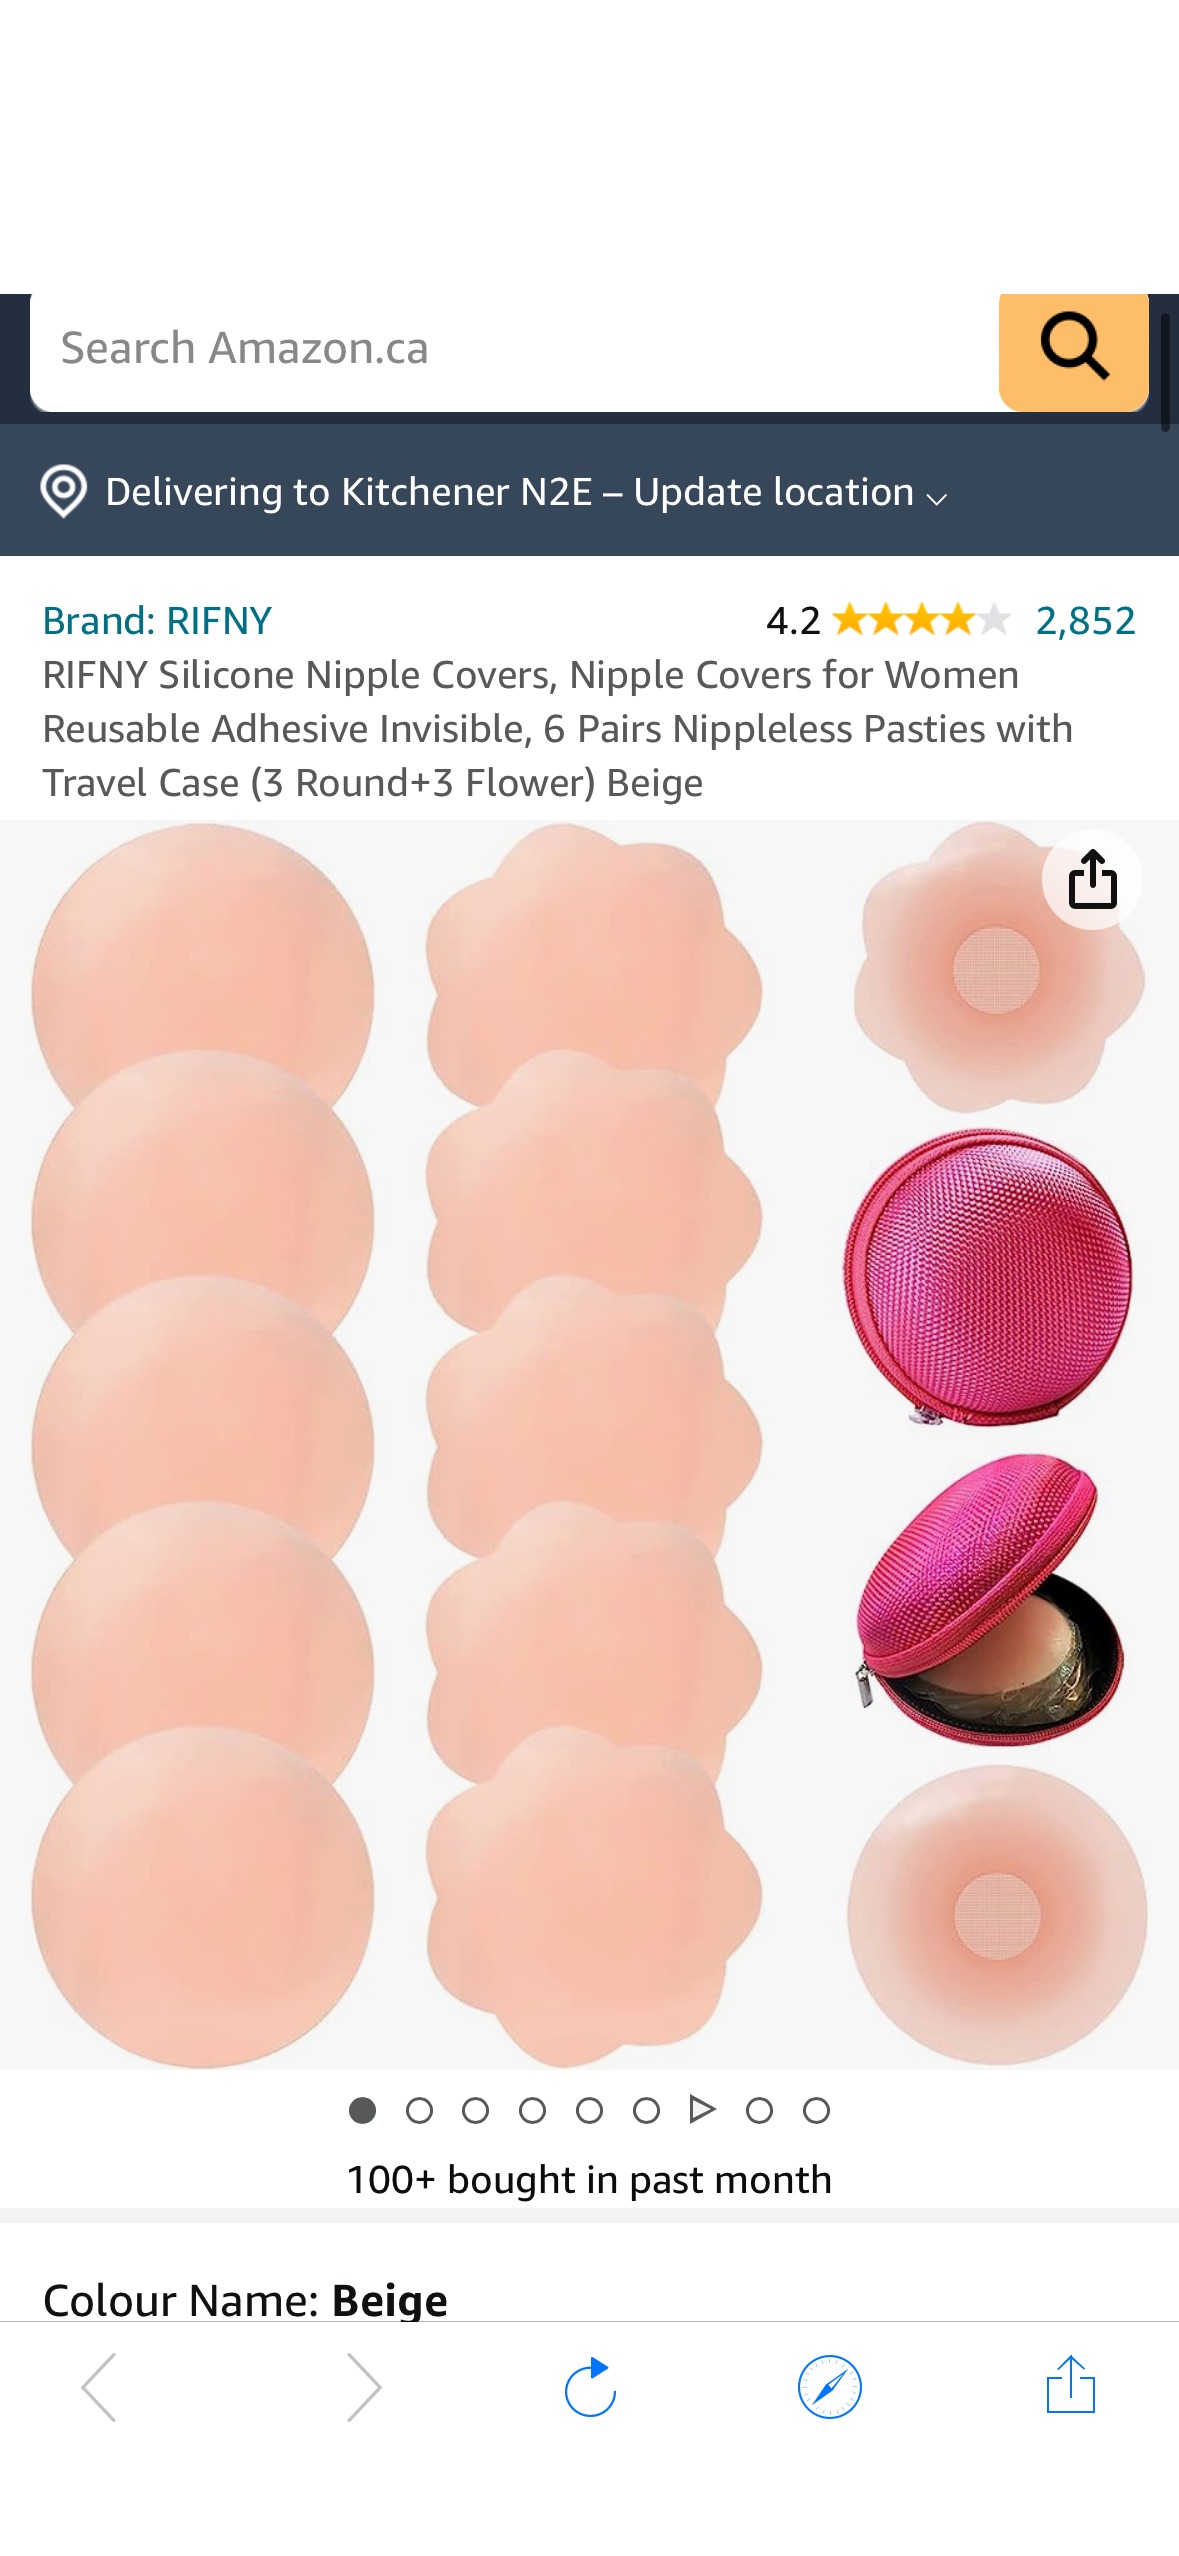 RIFNY Silicone Nipple Covers, Nipple Covers for Women Reusable Adhesive Invisible, 6 Pairs Nippleless Pasties with Travel Case (3 Round+3 Flower) Beige : Amazon.ca: Clothing, Shoes & Accessories